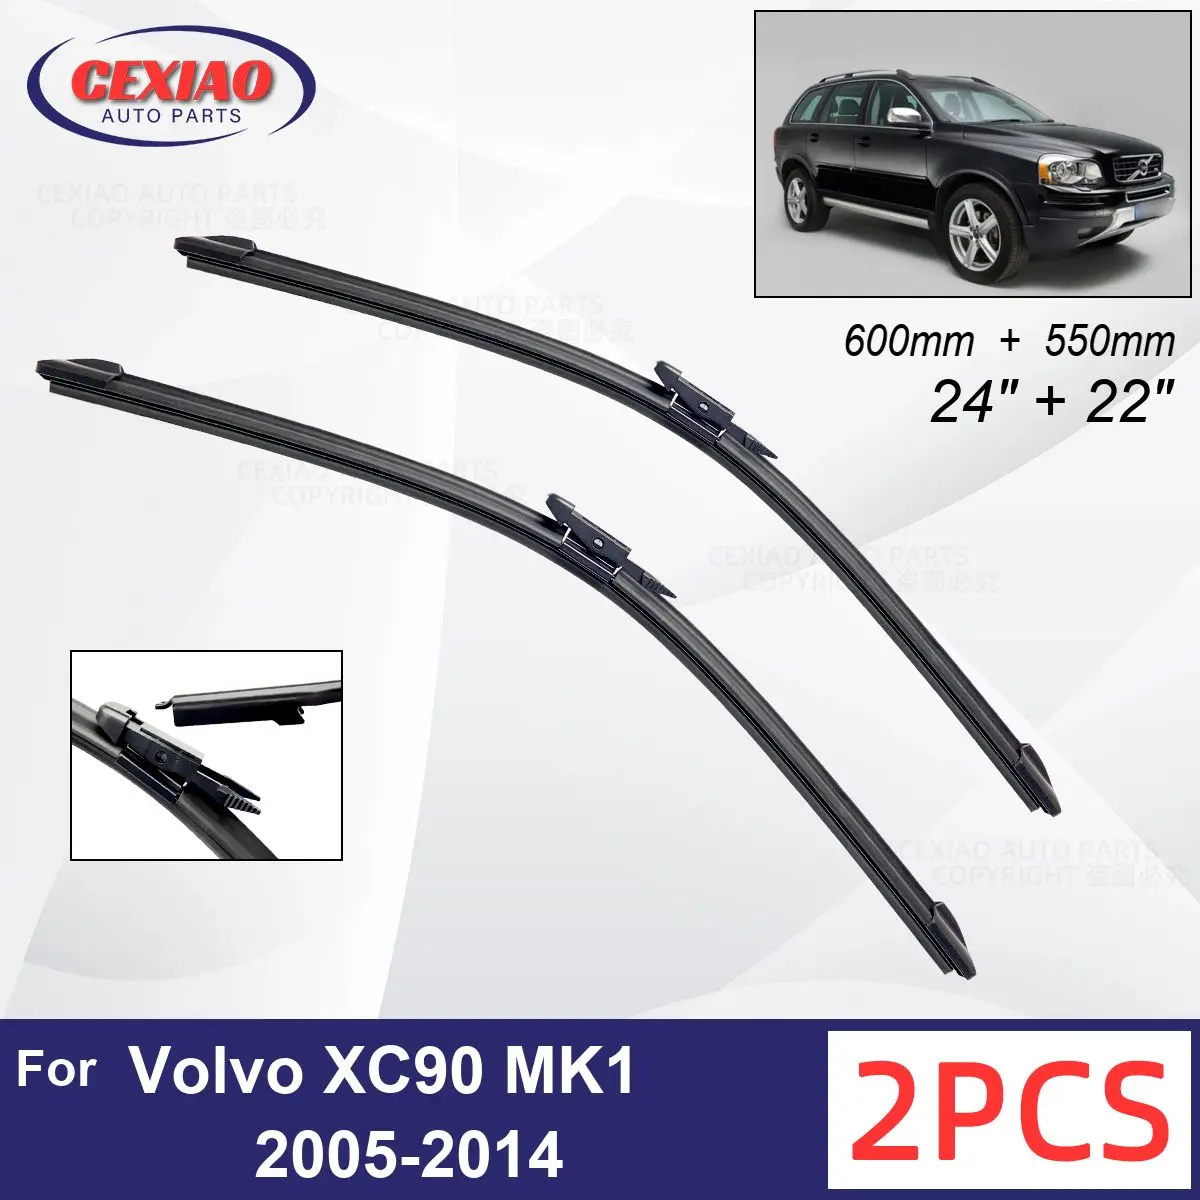 

Car Wiper For Volvo XC90 MK1 2005-2014 Front Wiper Blades Soft Rubber Windscreen Wipers Auto Windshield 24"+22" 600mm + 550mm